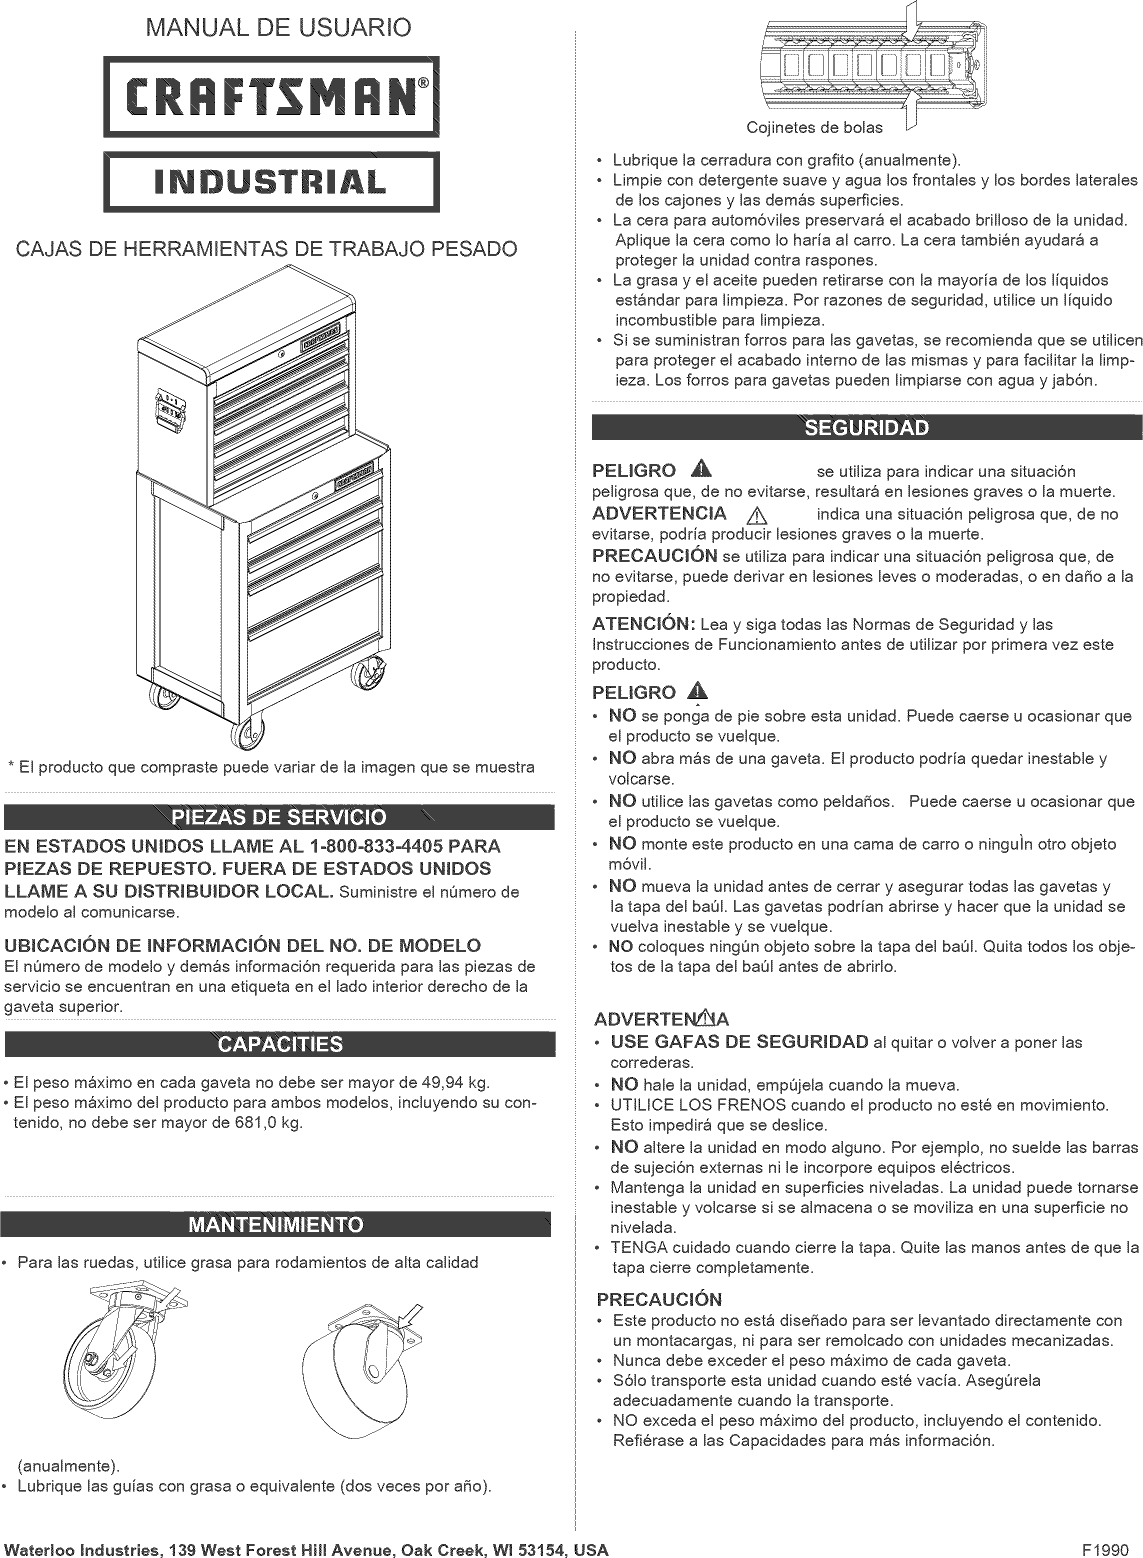 Page 5 of 8 - Craftsman 706452580 User Manual  TOOL CHEST - Manuals And Guides 1409282L